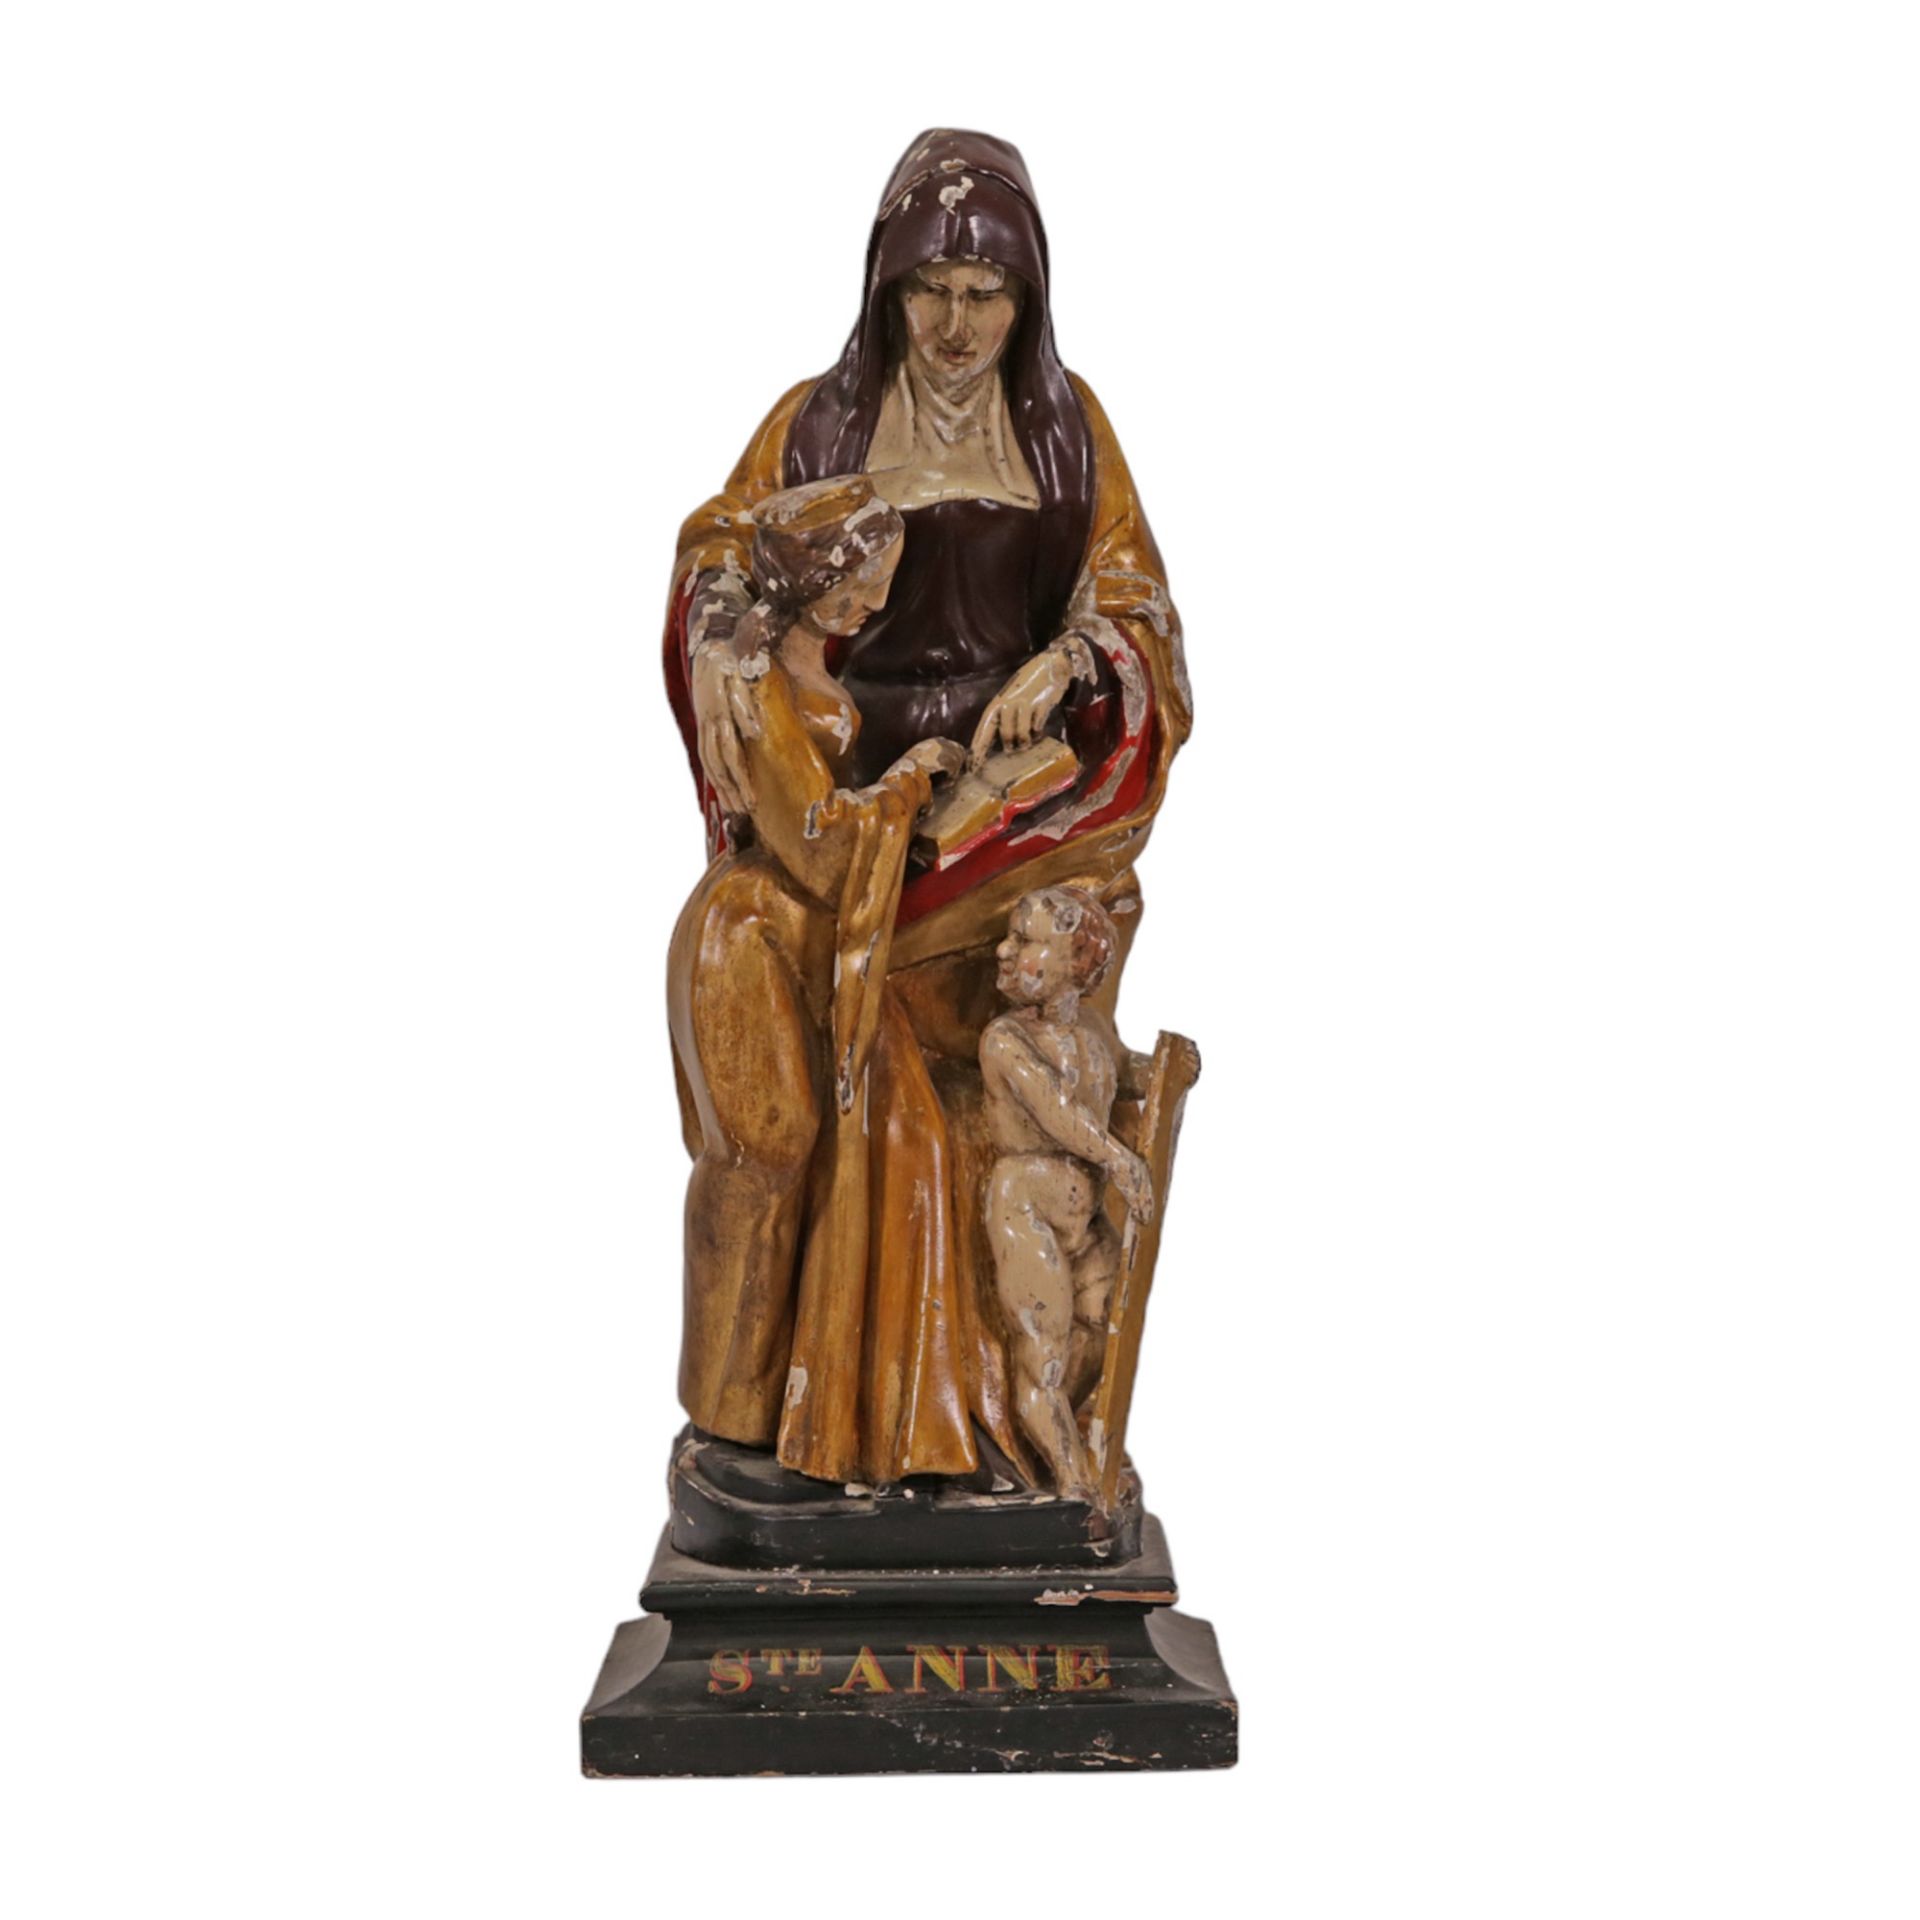 RARE, ANTIQUE, POLYCHROME WOODEN SCULPTURE "SAINT ANNE TRINITI", ON THE BASIS. FRANCE 19th CENTURY. - Image 2 of 13